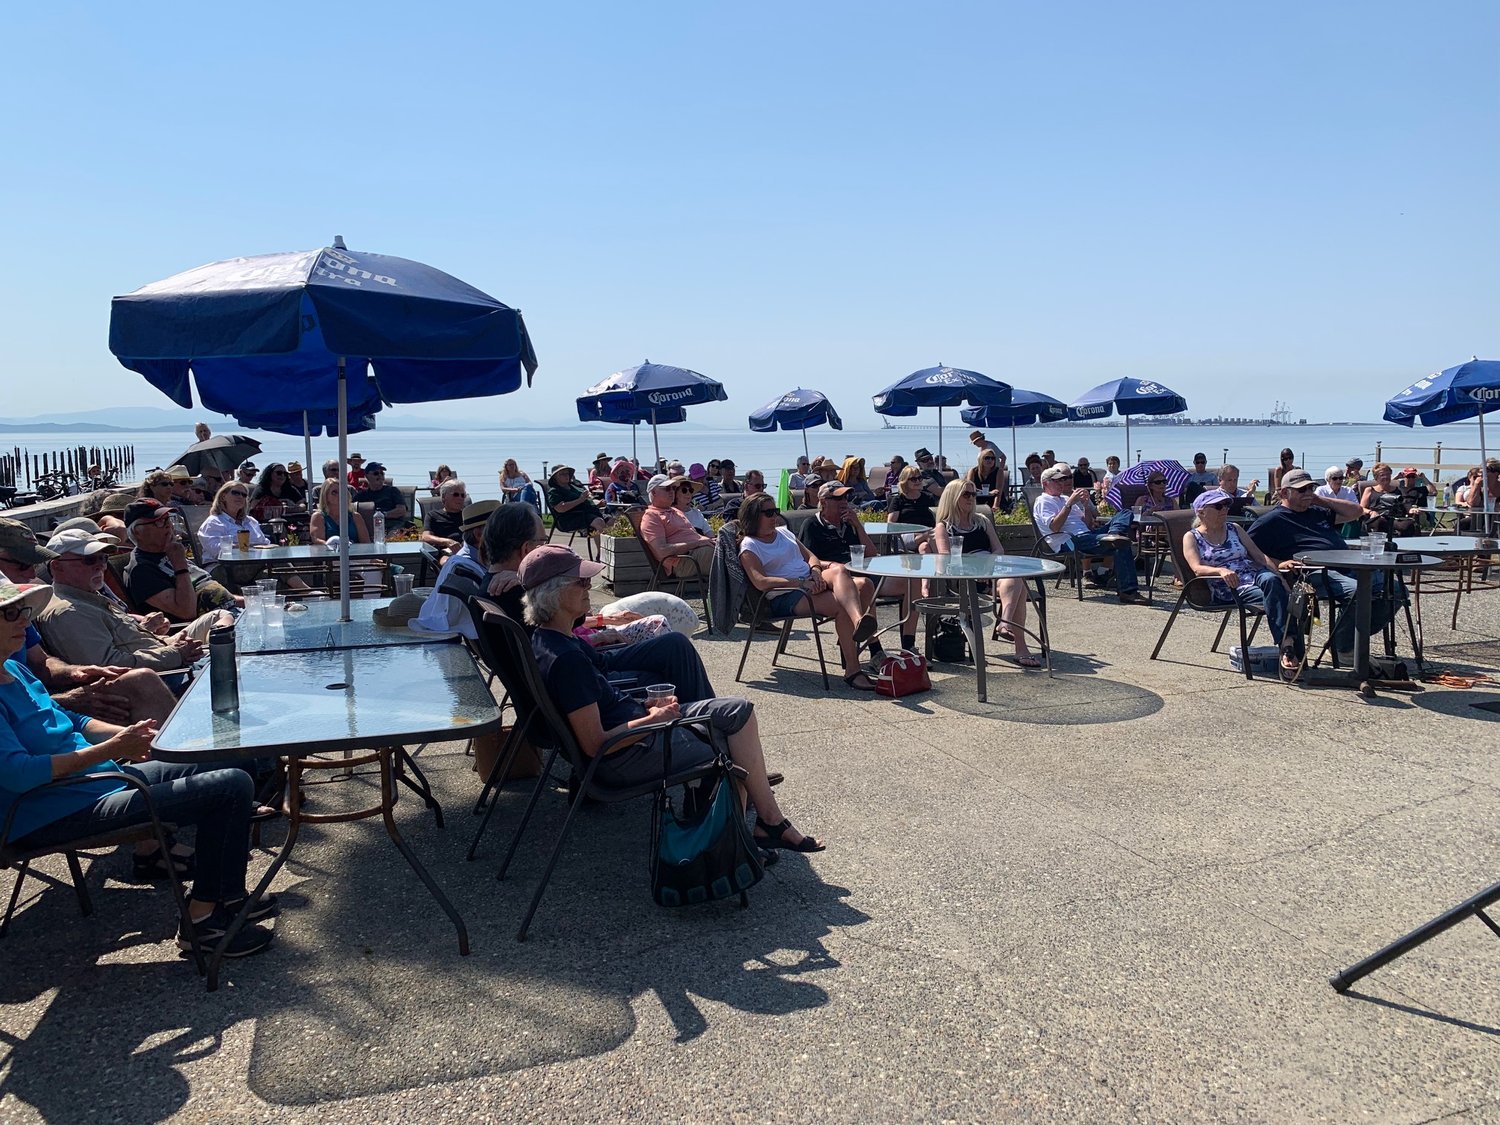 Approximately 100 Point Roberts residents attended a town hall meeting with state representatives Alicia Rule and Sharon Shewmake and Whatcom County executive Satpal Sidhu at the Reef July 9.